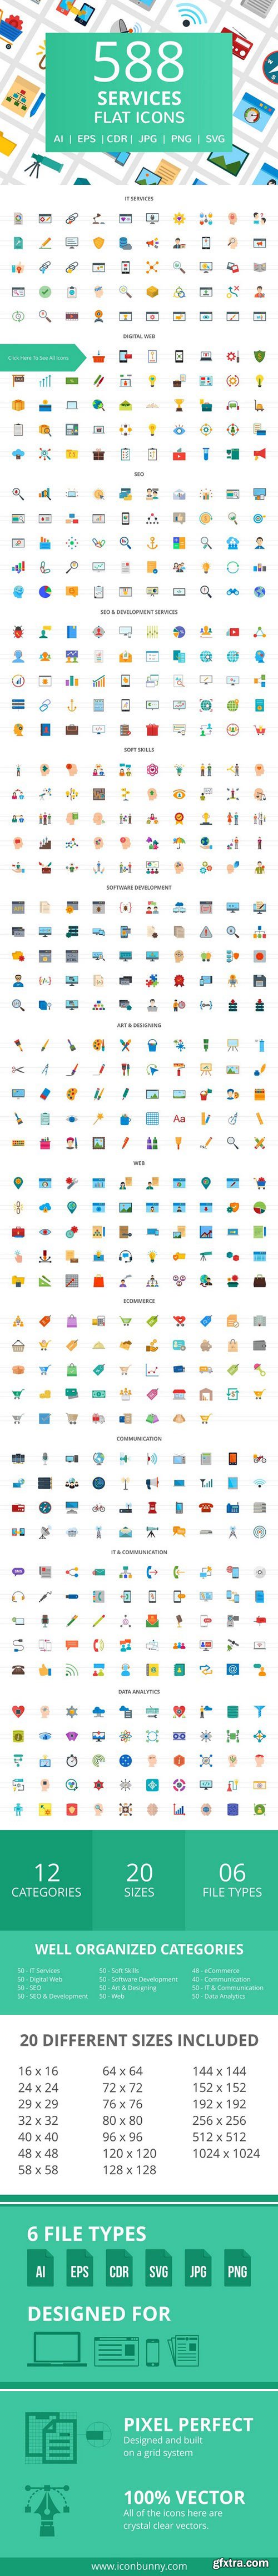 CM - 588 Services Flat Icons 2056091